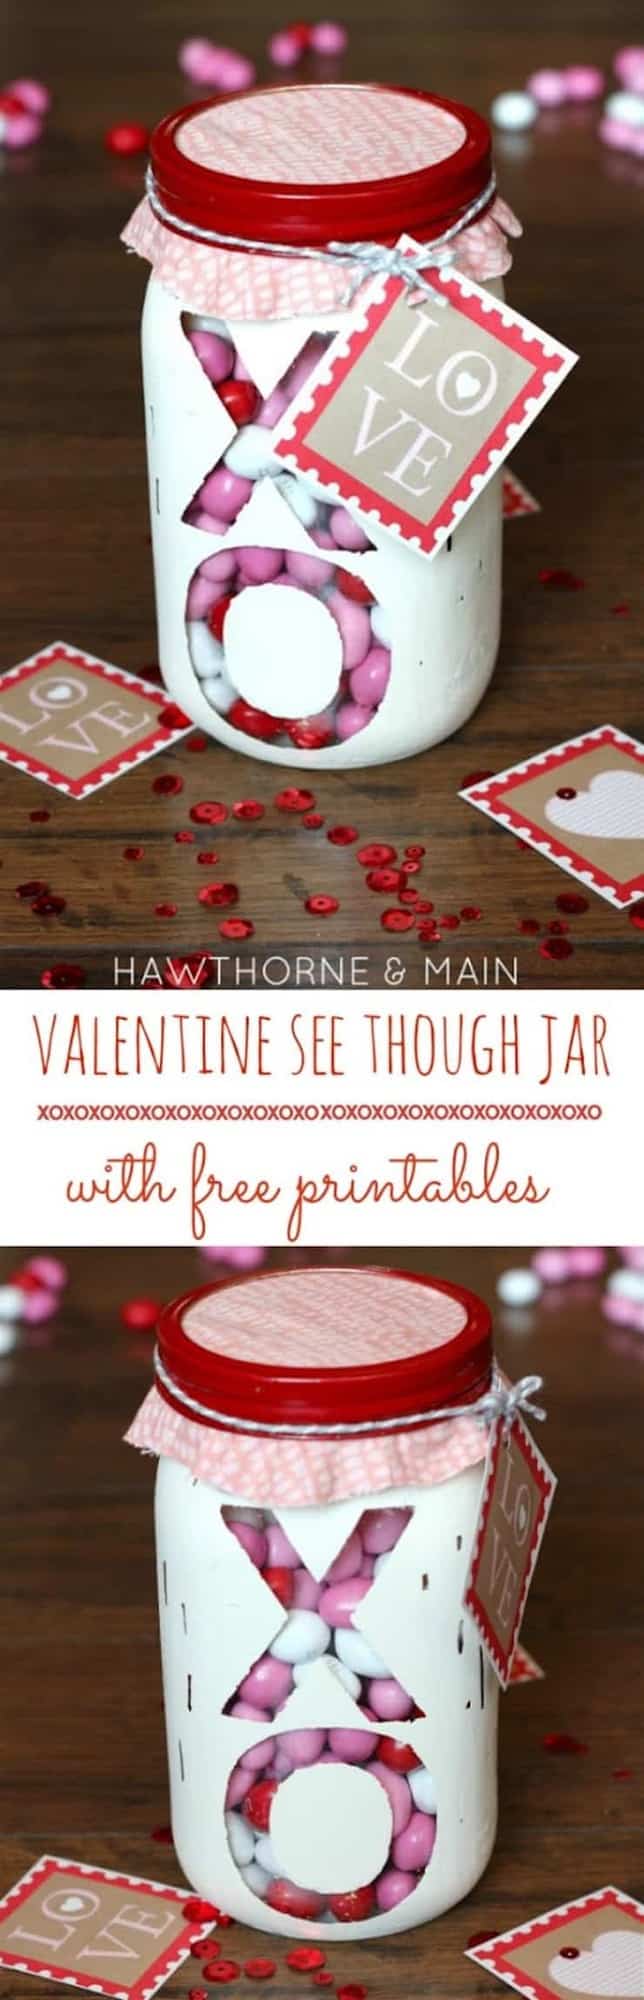 Valentine's Day Mason Jar - an easy DIY Valentine's Day gift. Fill with your favorite red pink and white candy!